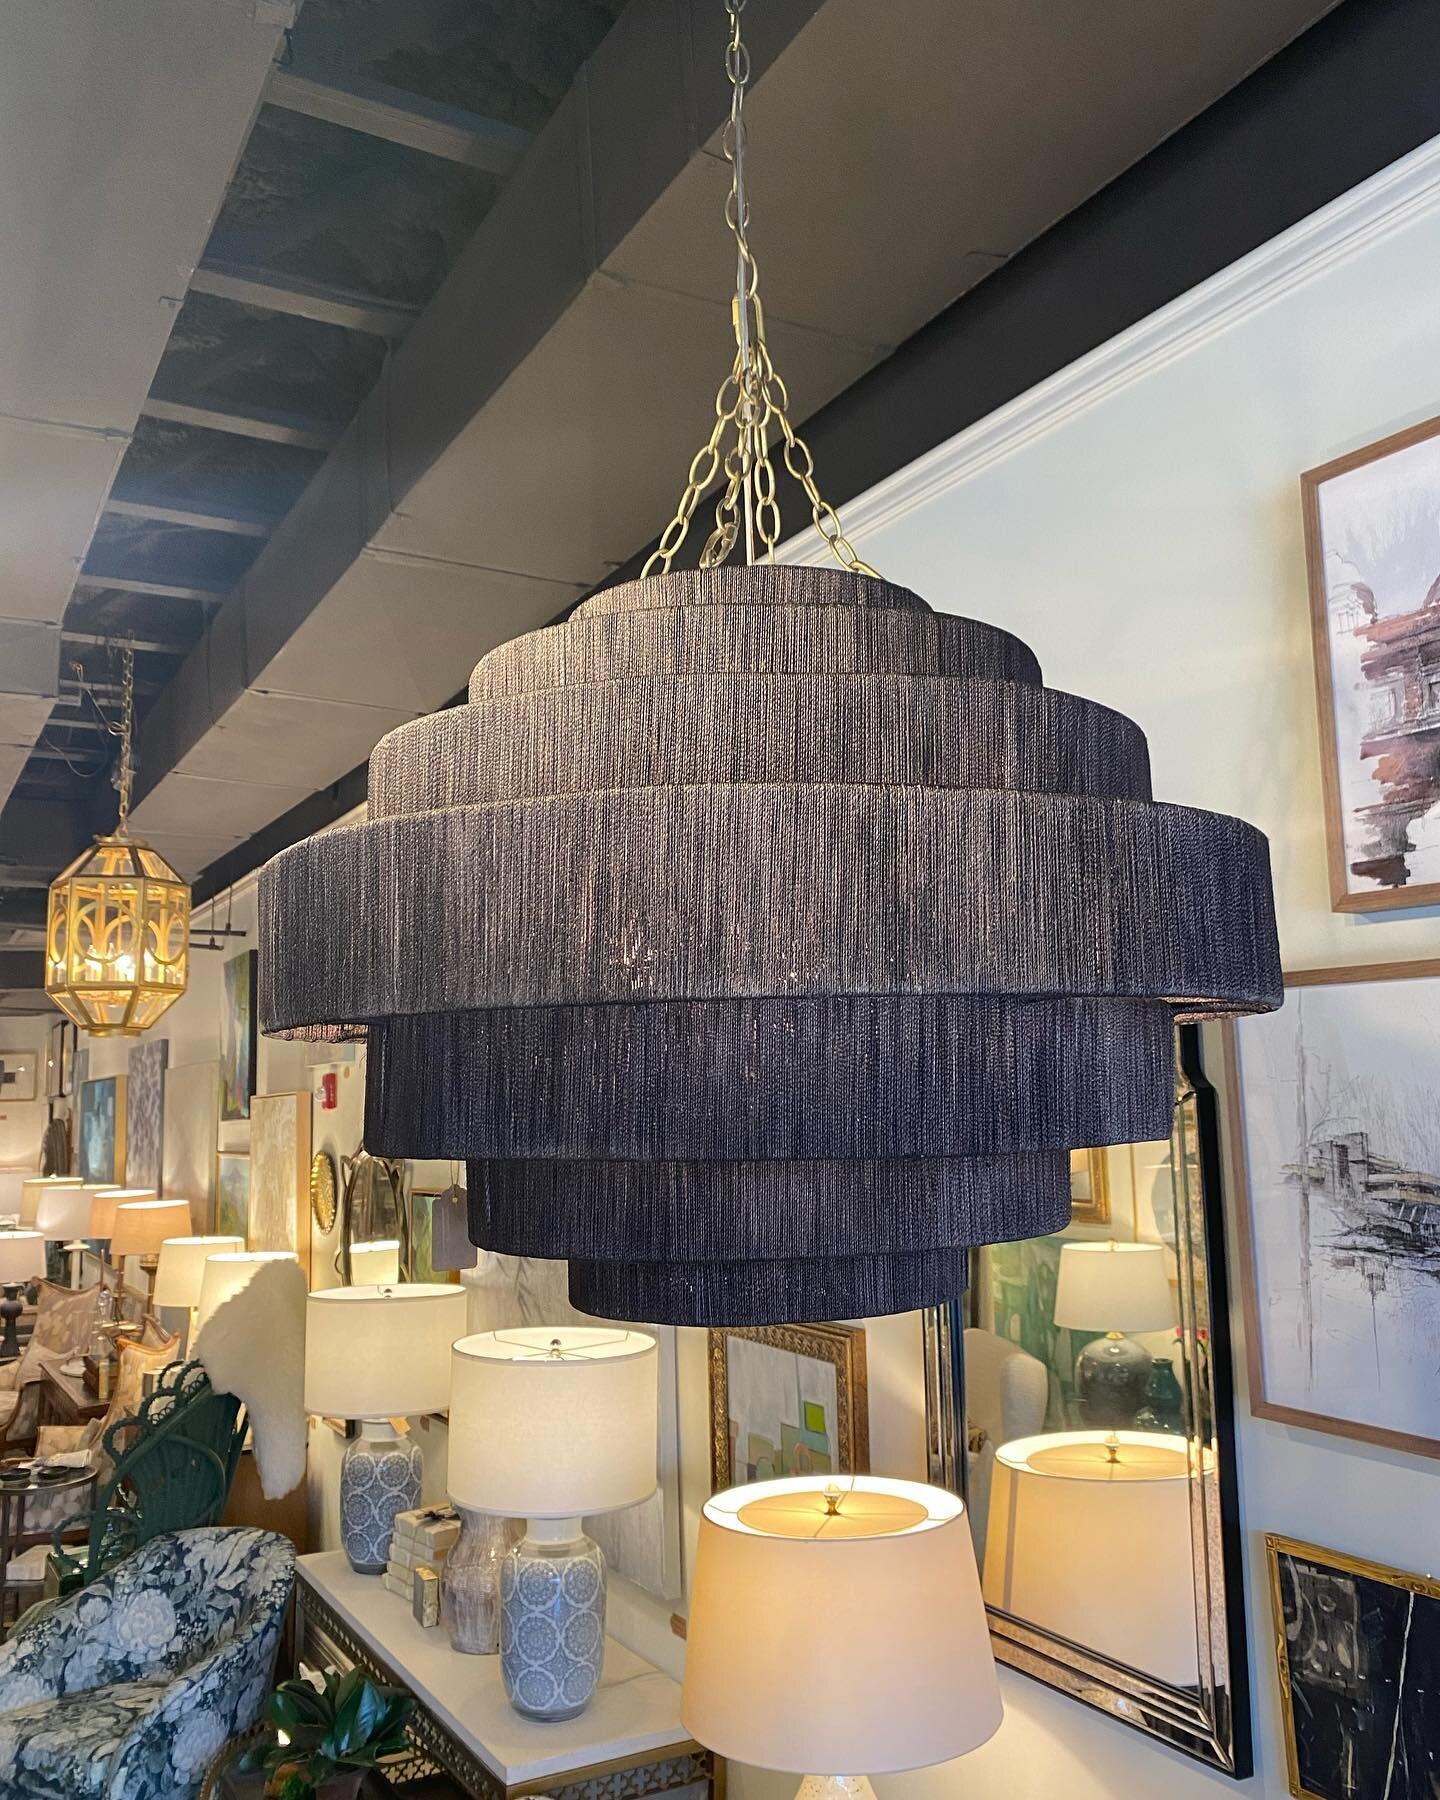 See our collection of unique lighting @marketplaceinteriorsnashville 
1st - espresso abaca rope with antiqued brass chain &amp; canopy 
2nd - taupe leather strapping chandelier
3rd - horn and metal chandelier
4th - wooden beaded chandelier